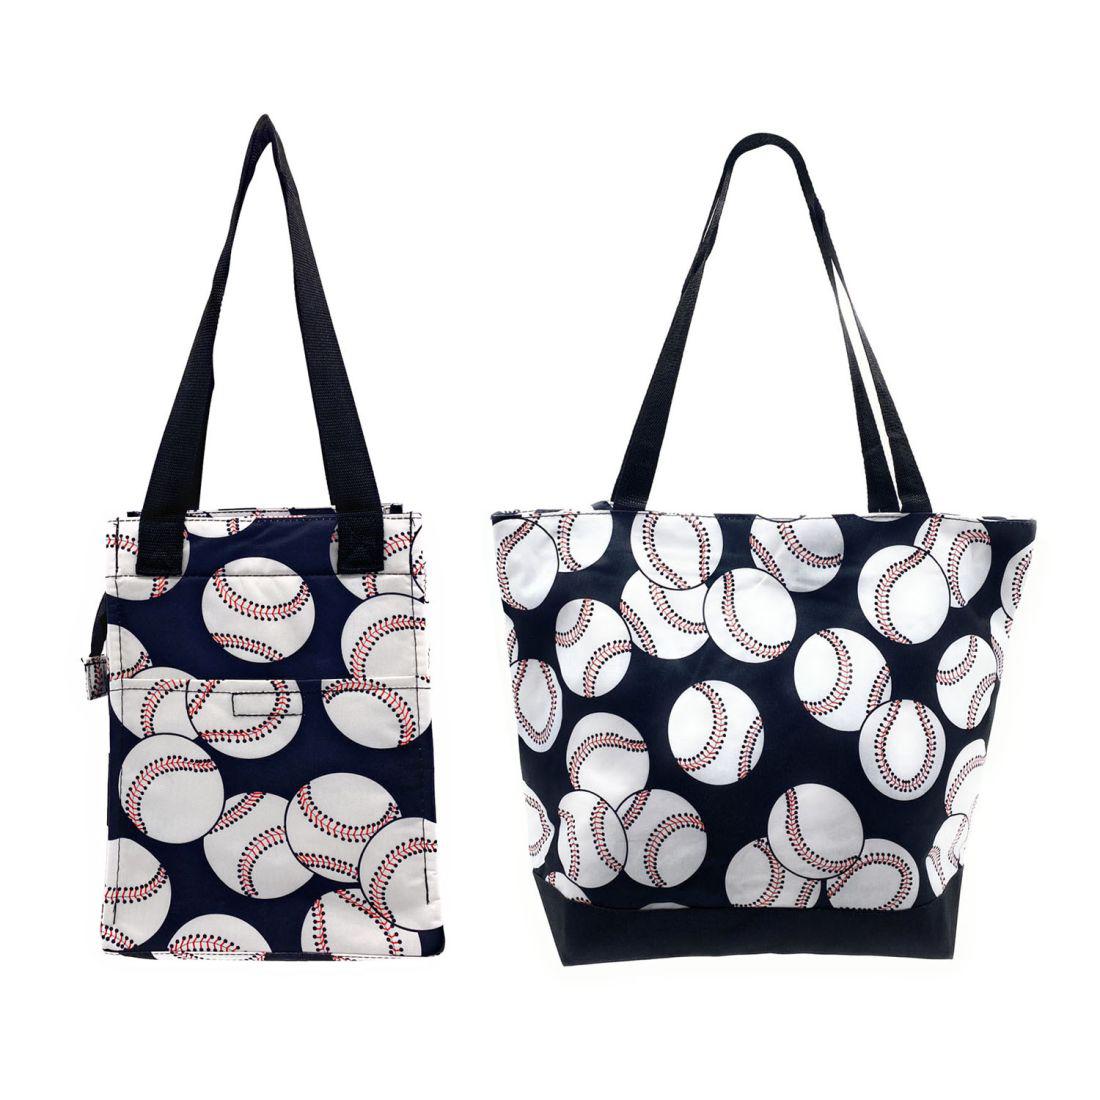 Empire Cove 2 Piece Gift Set Baseball Large Tote Bag Insulated Lunch Bag Cooler 